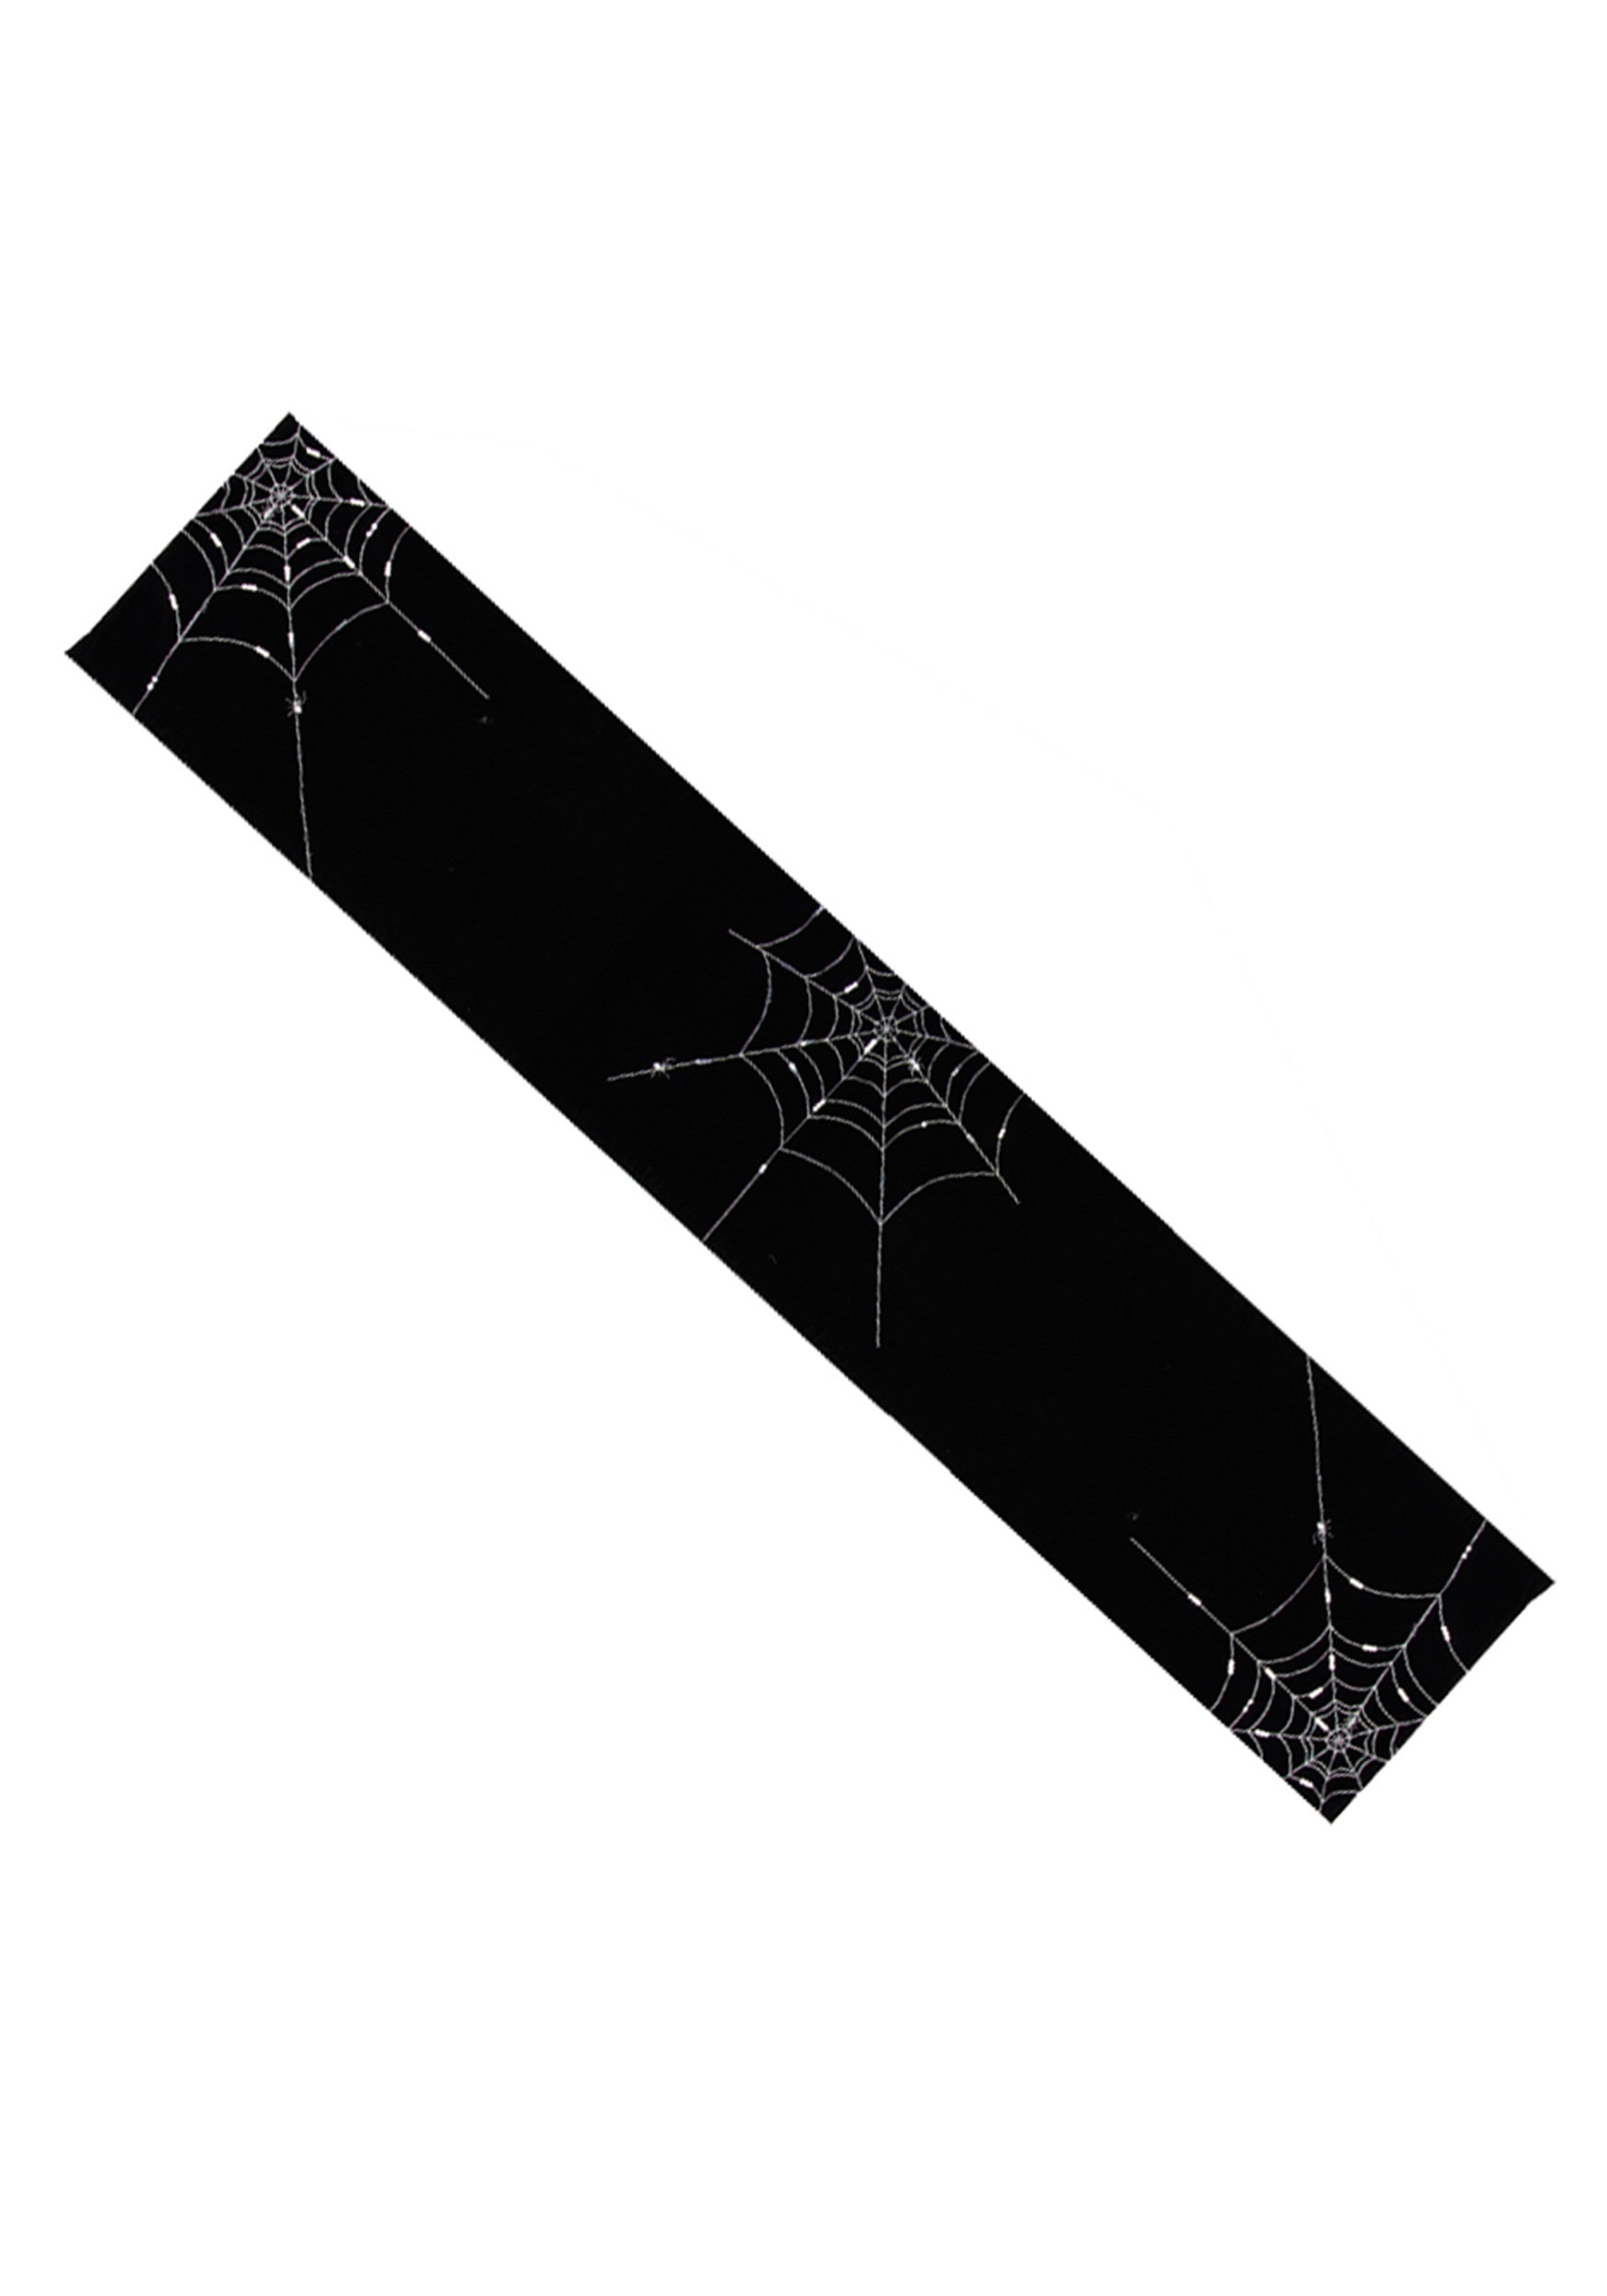 6' Spider Web Table Runner Acessory